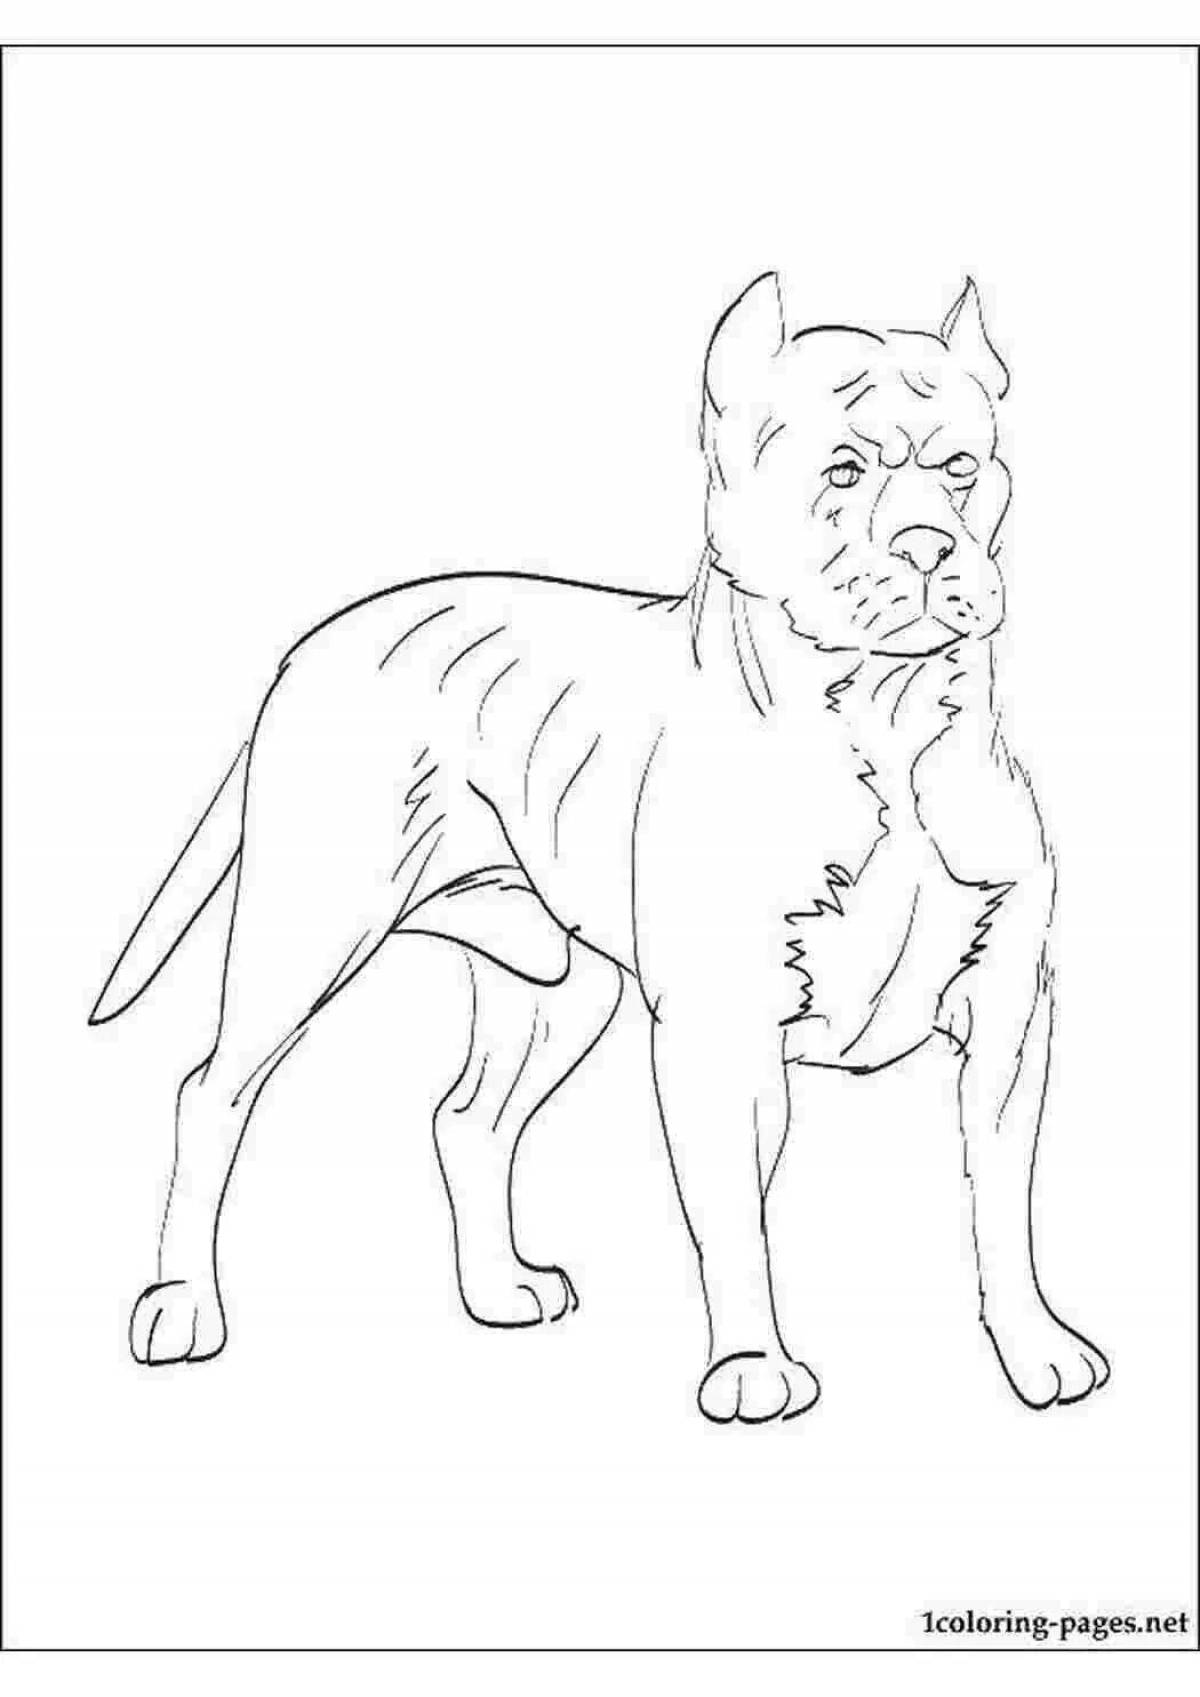 Fancy stafford coloring book